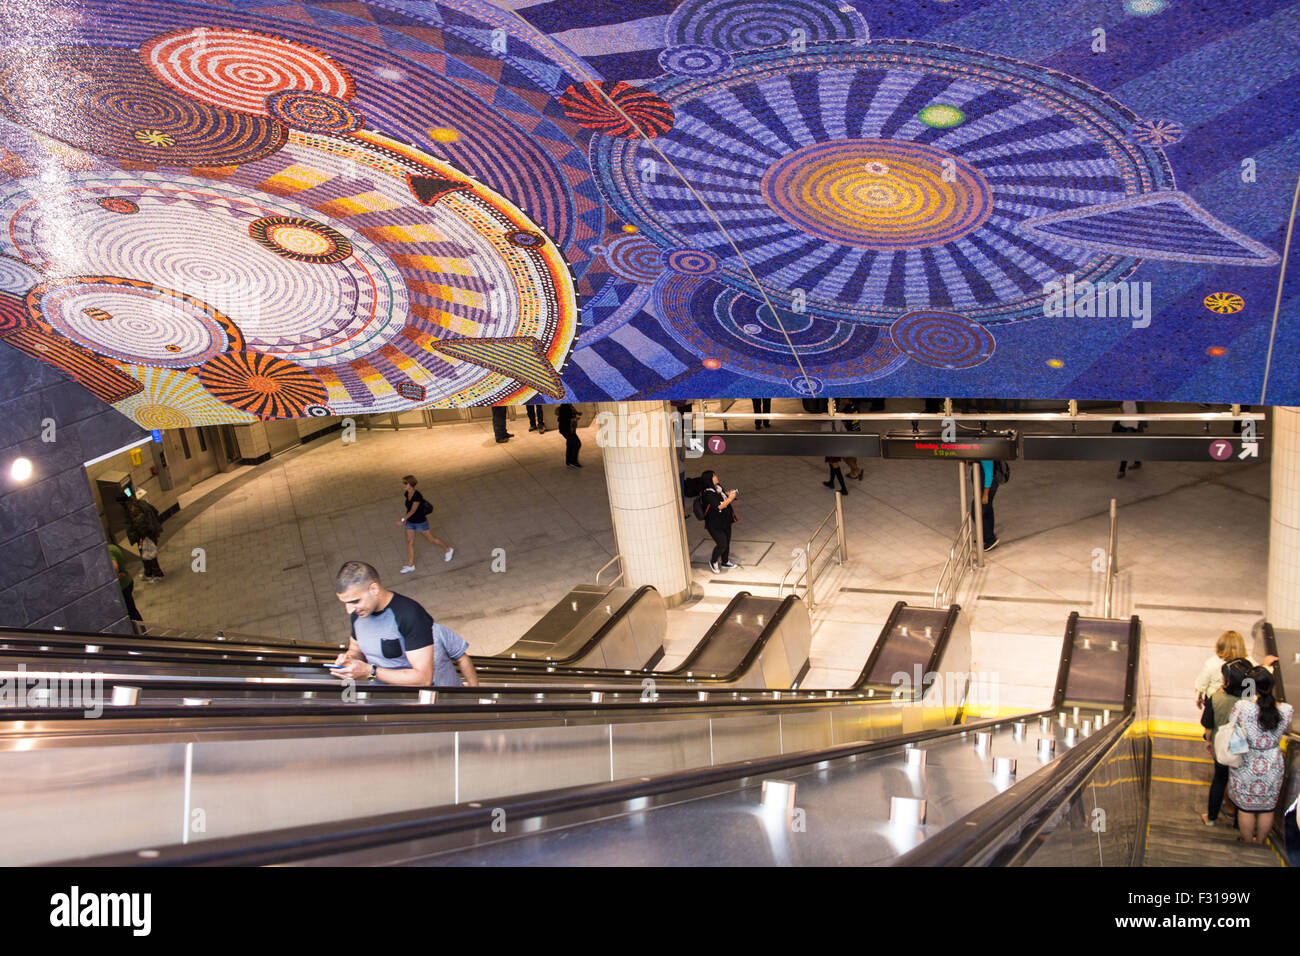 View escalator and mosaic tile ceiling at new Hudson Yards 7 train subway station with travelers visible. Stock Photo